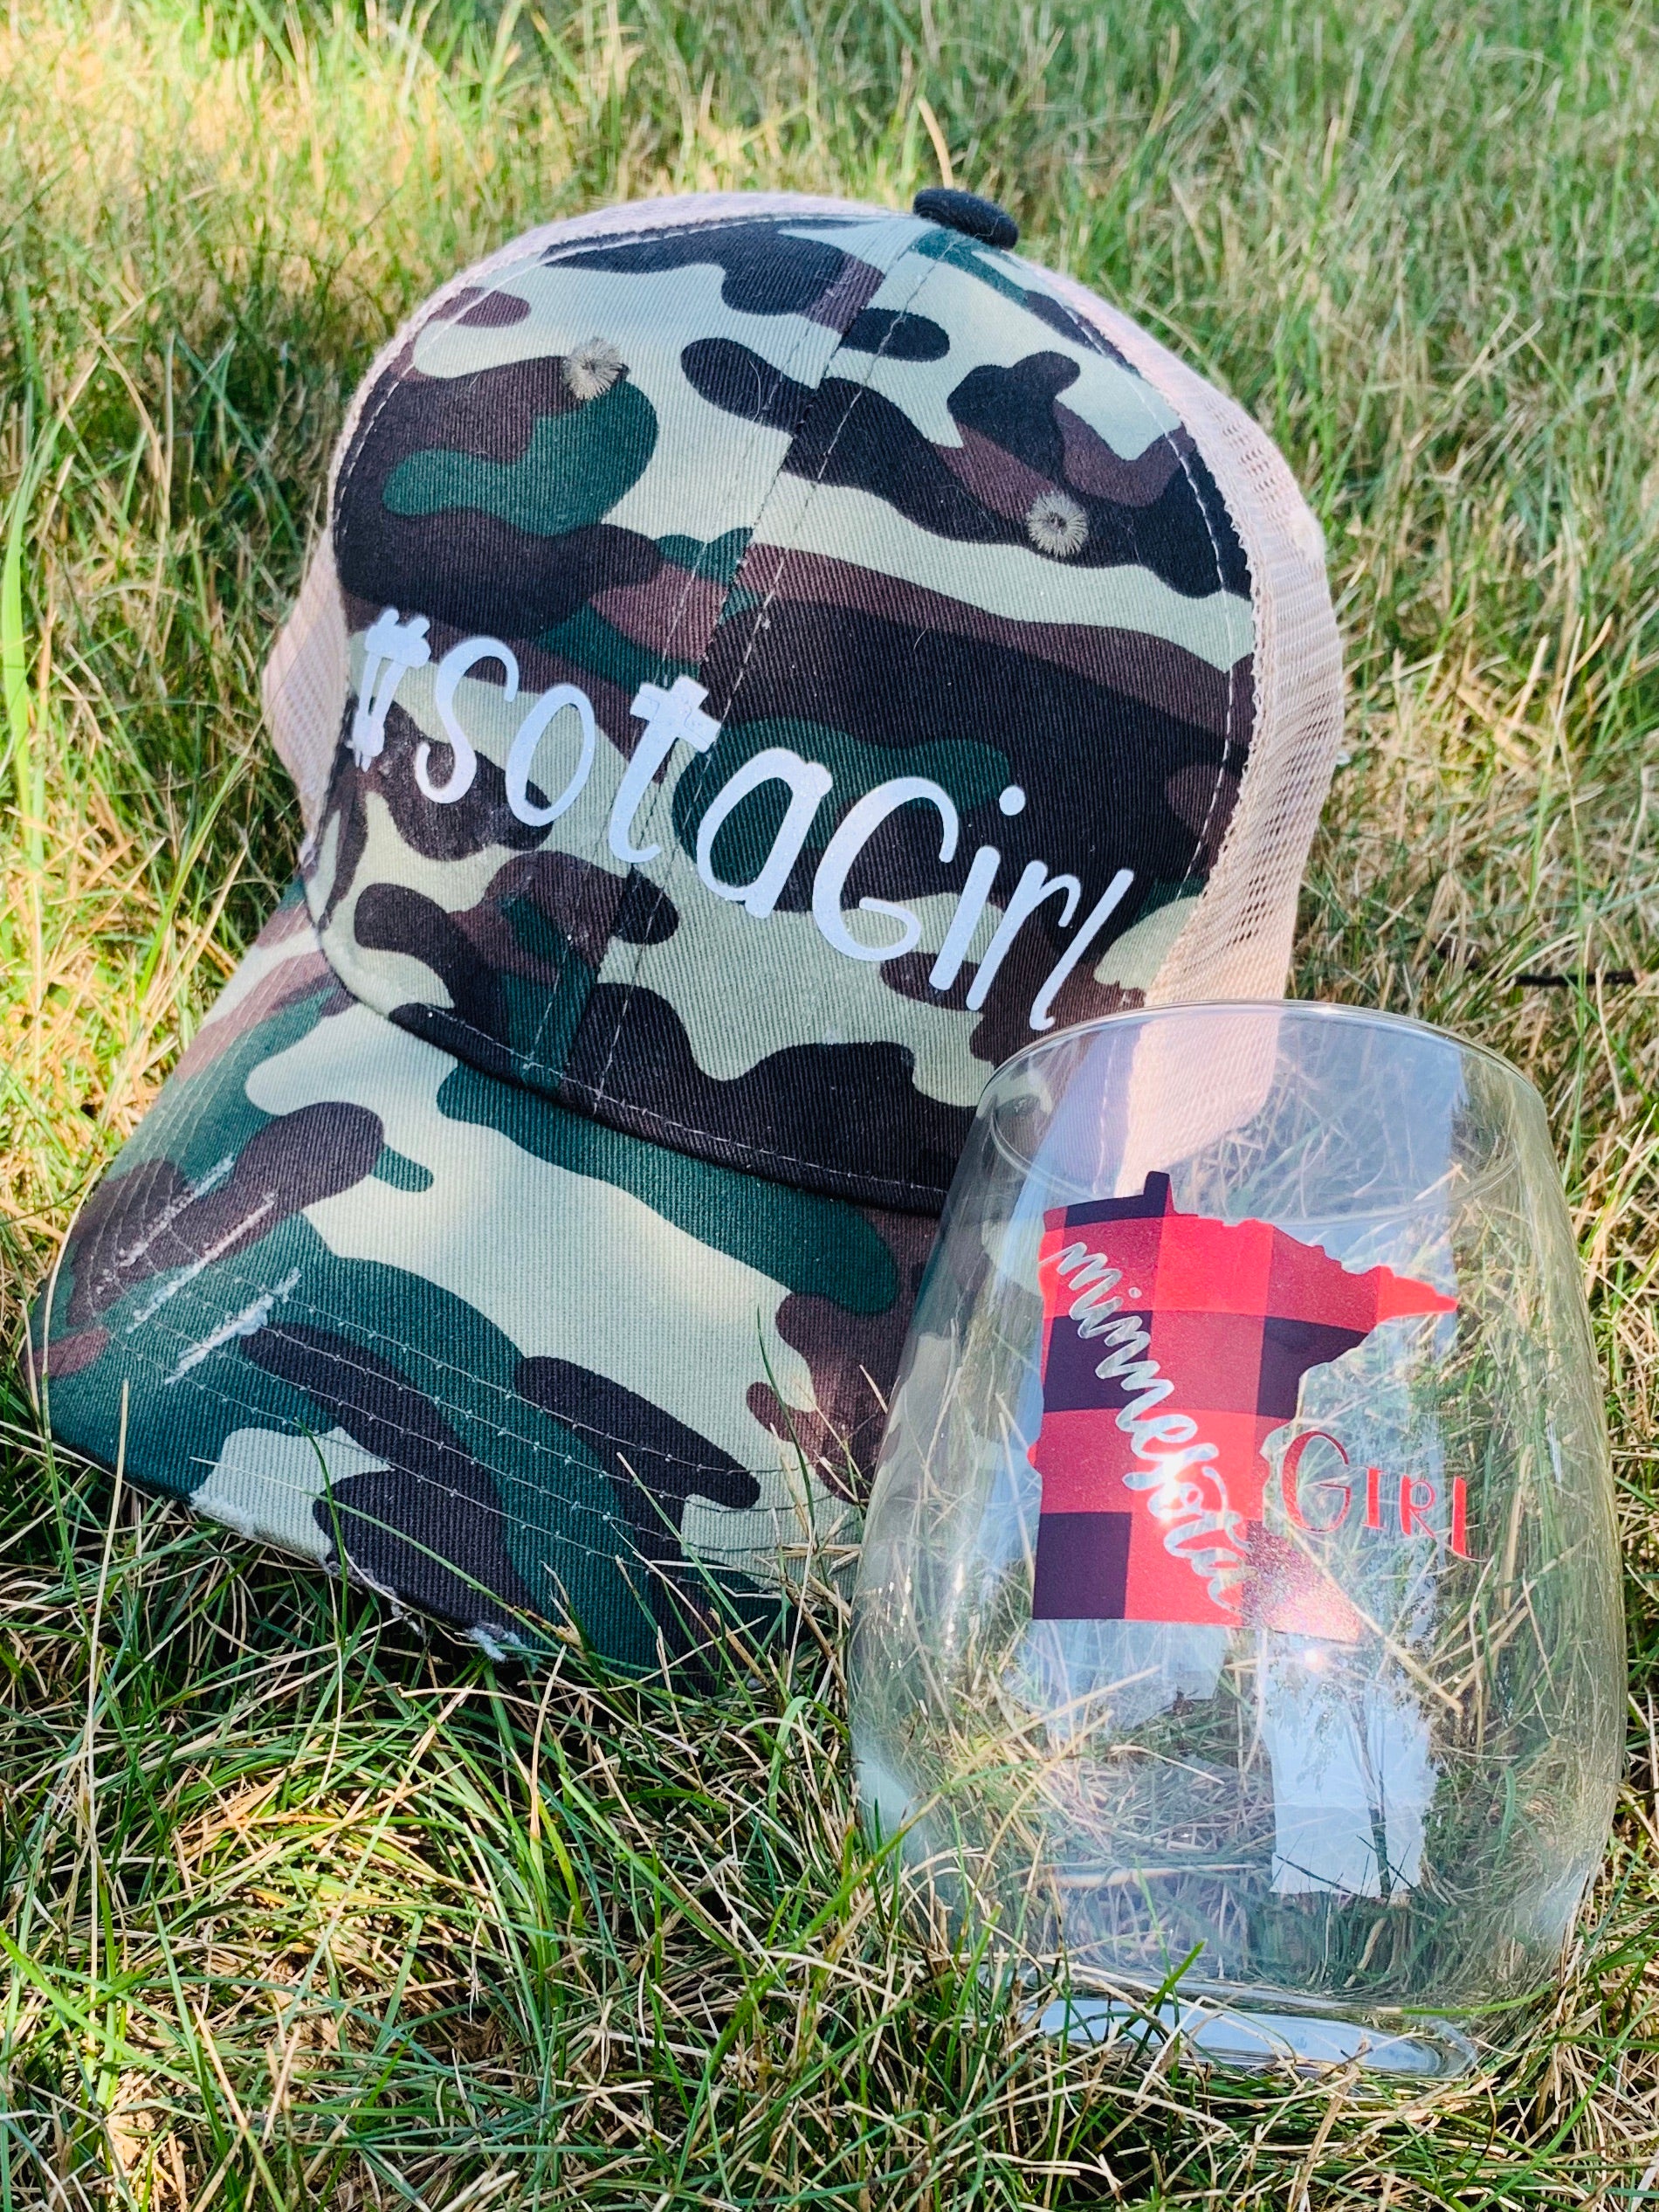 Wine glasses { Minnesota girl } Handmade by Stacy. Wholesale available. - Stacy's Pink Martini Boutique